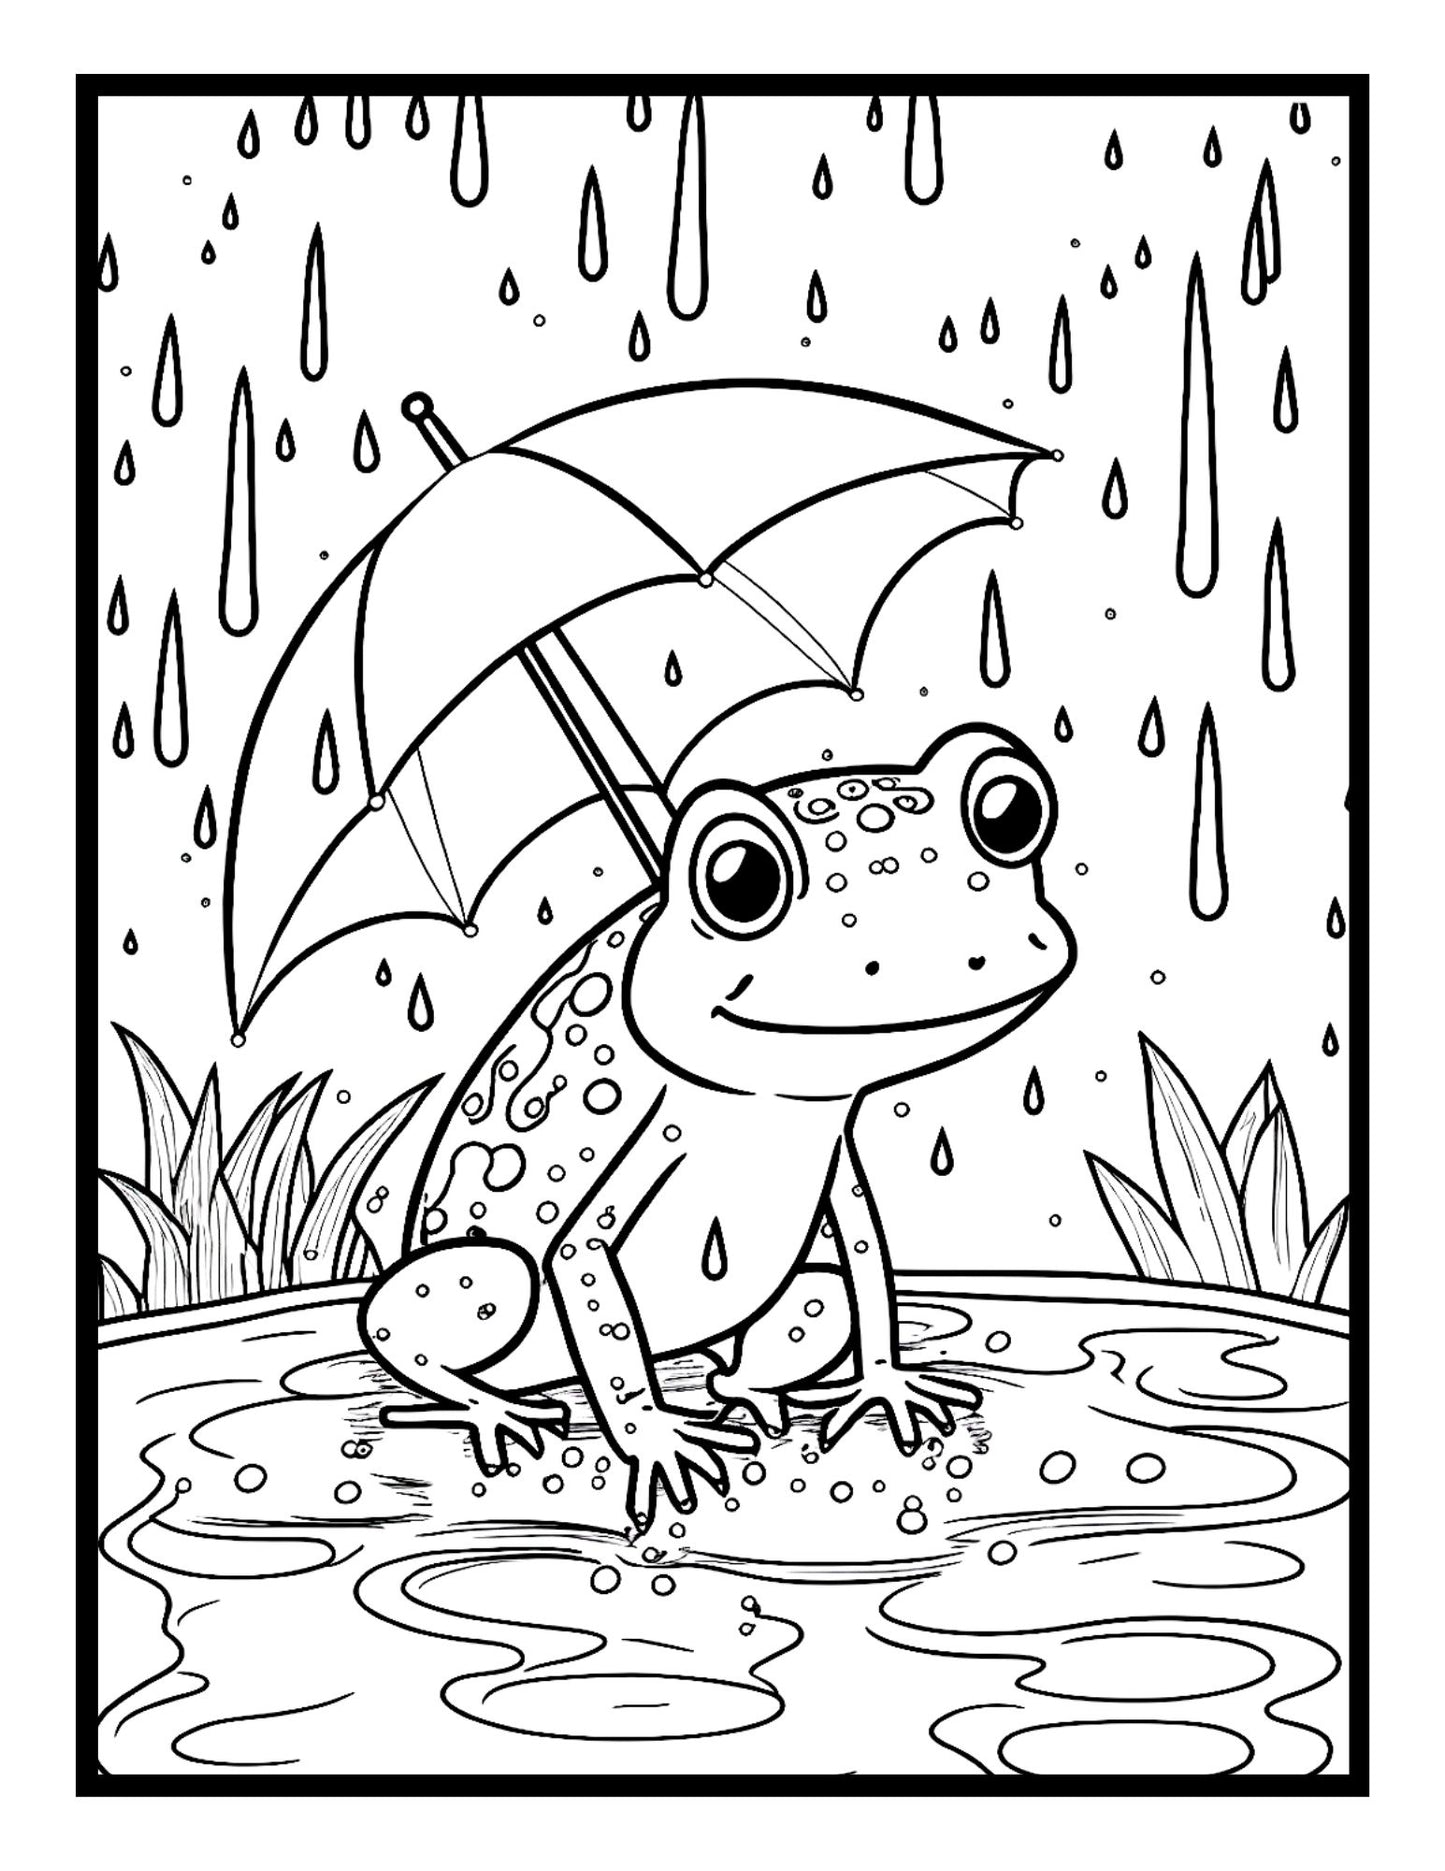 Cute Toad Coloring Book Frog Coloring Book For Adult And Kids Animal Habitat Coloring Jungle Animal Coloring Wild Life Animal Coloring Book